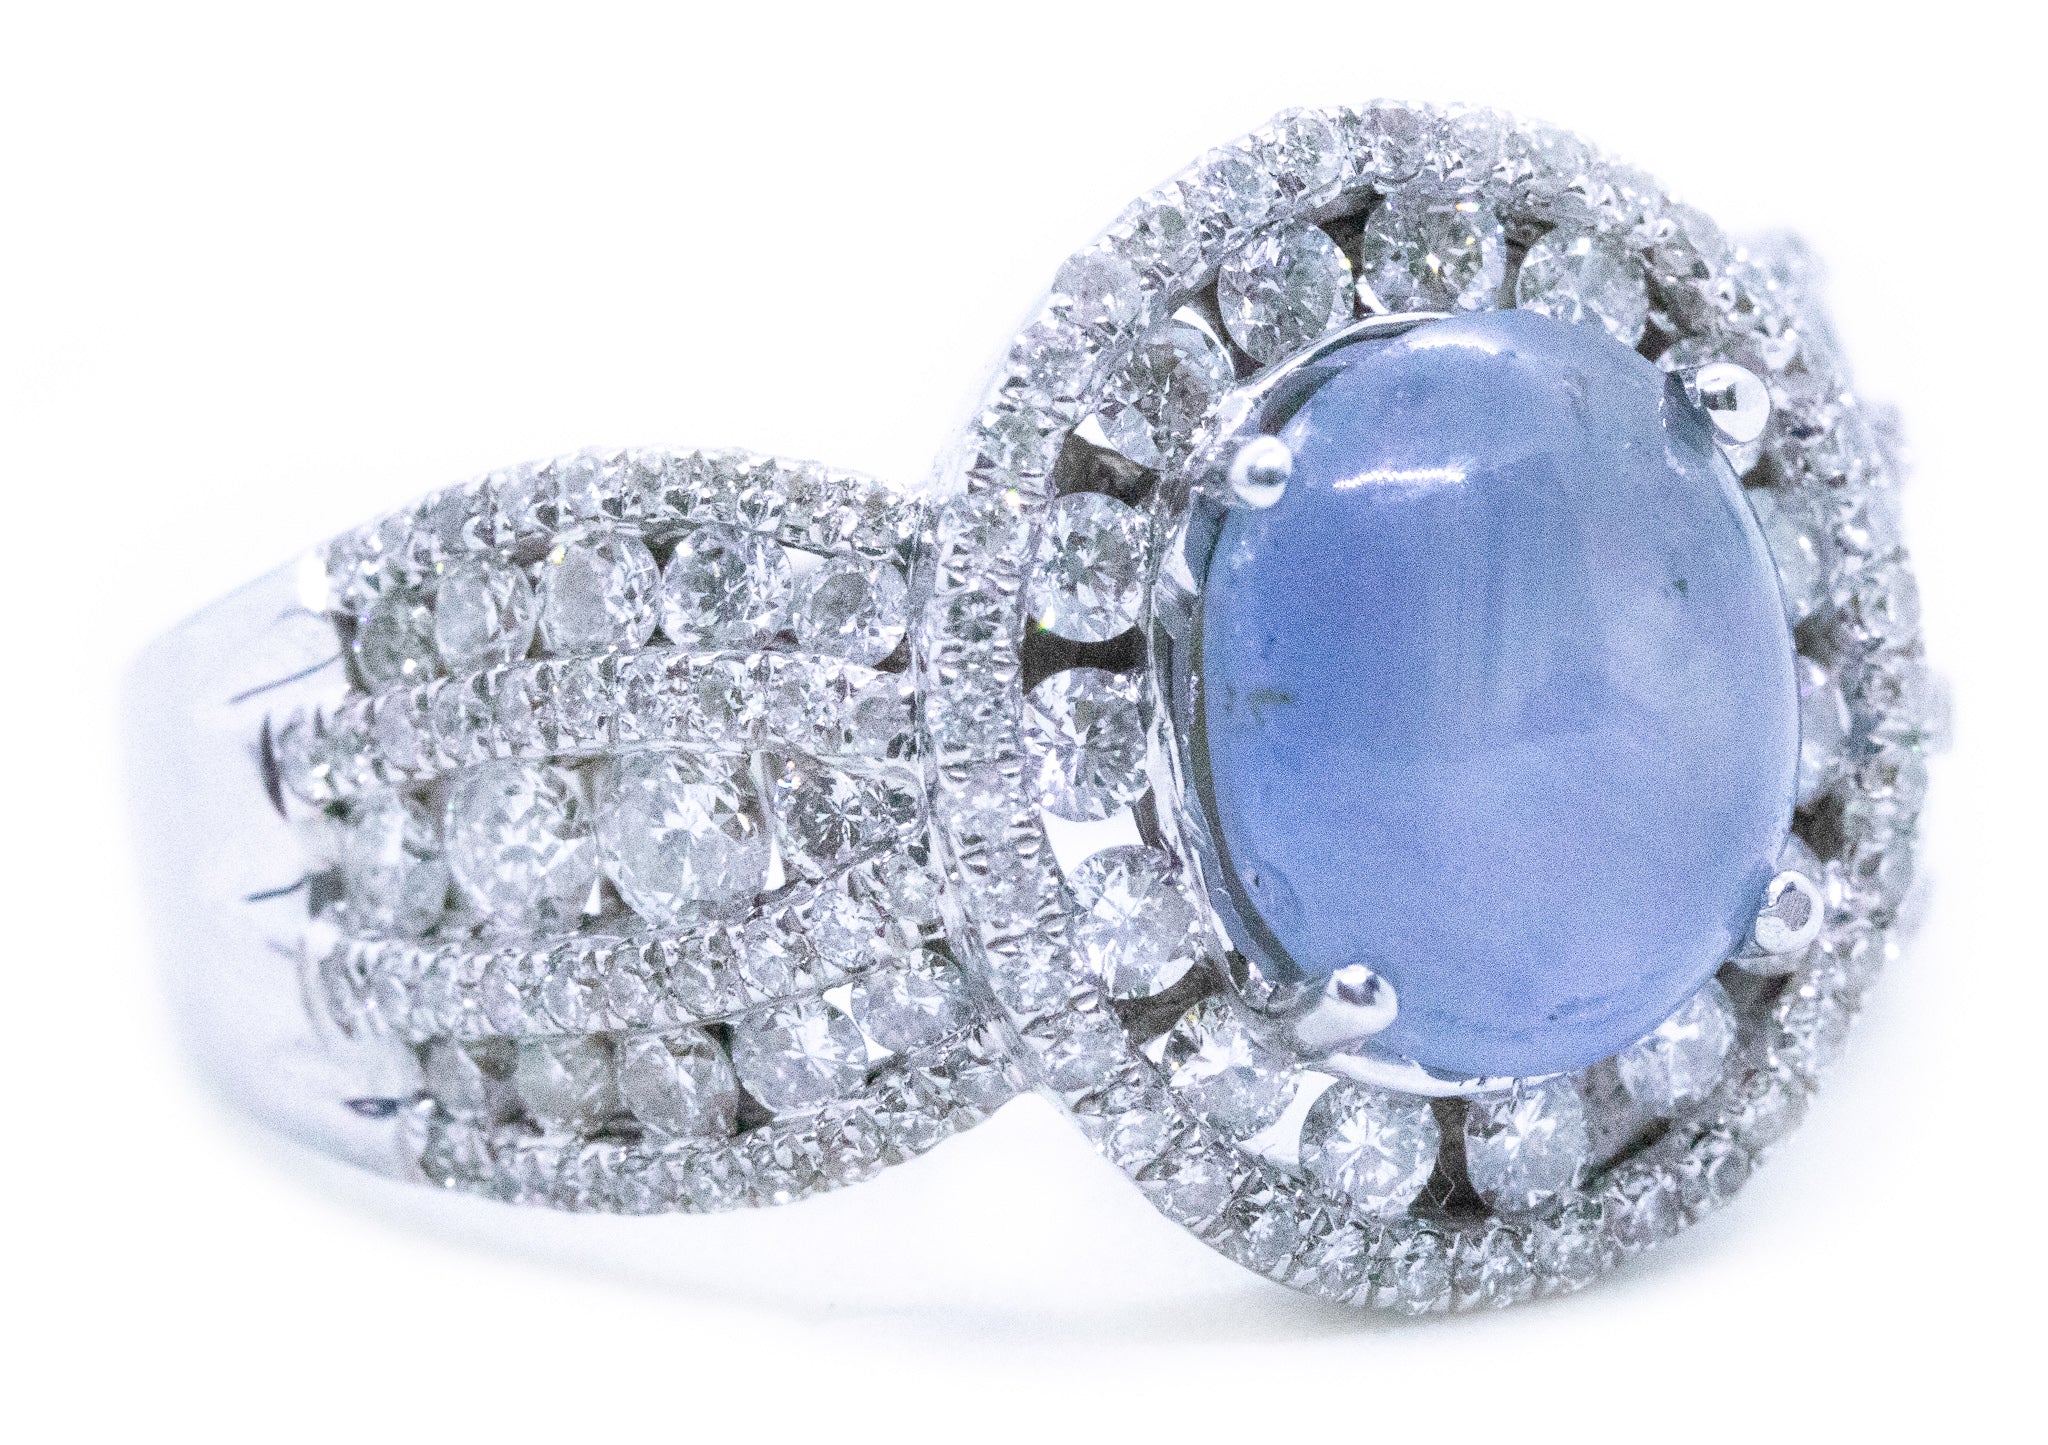 CLASSICAL 18 KT RING WITH 4.95 Ctw DIAMONDS & STAR SAPPHIRE